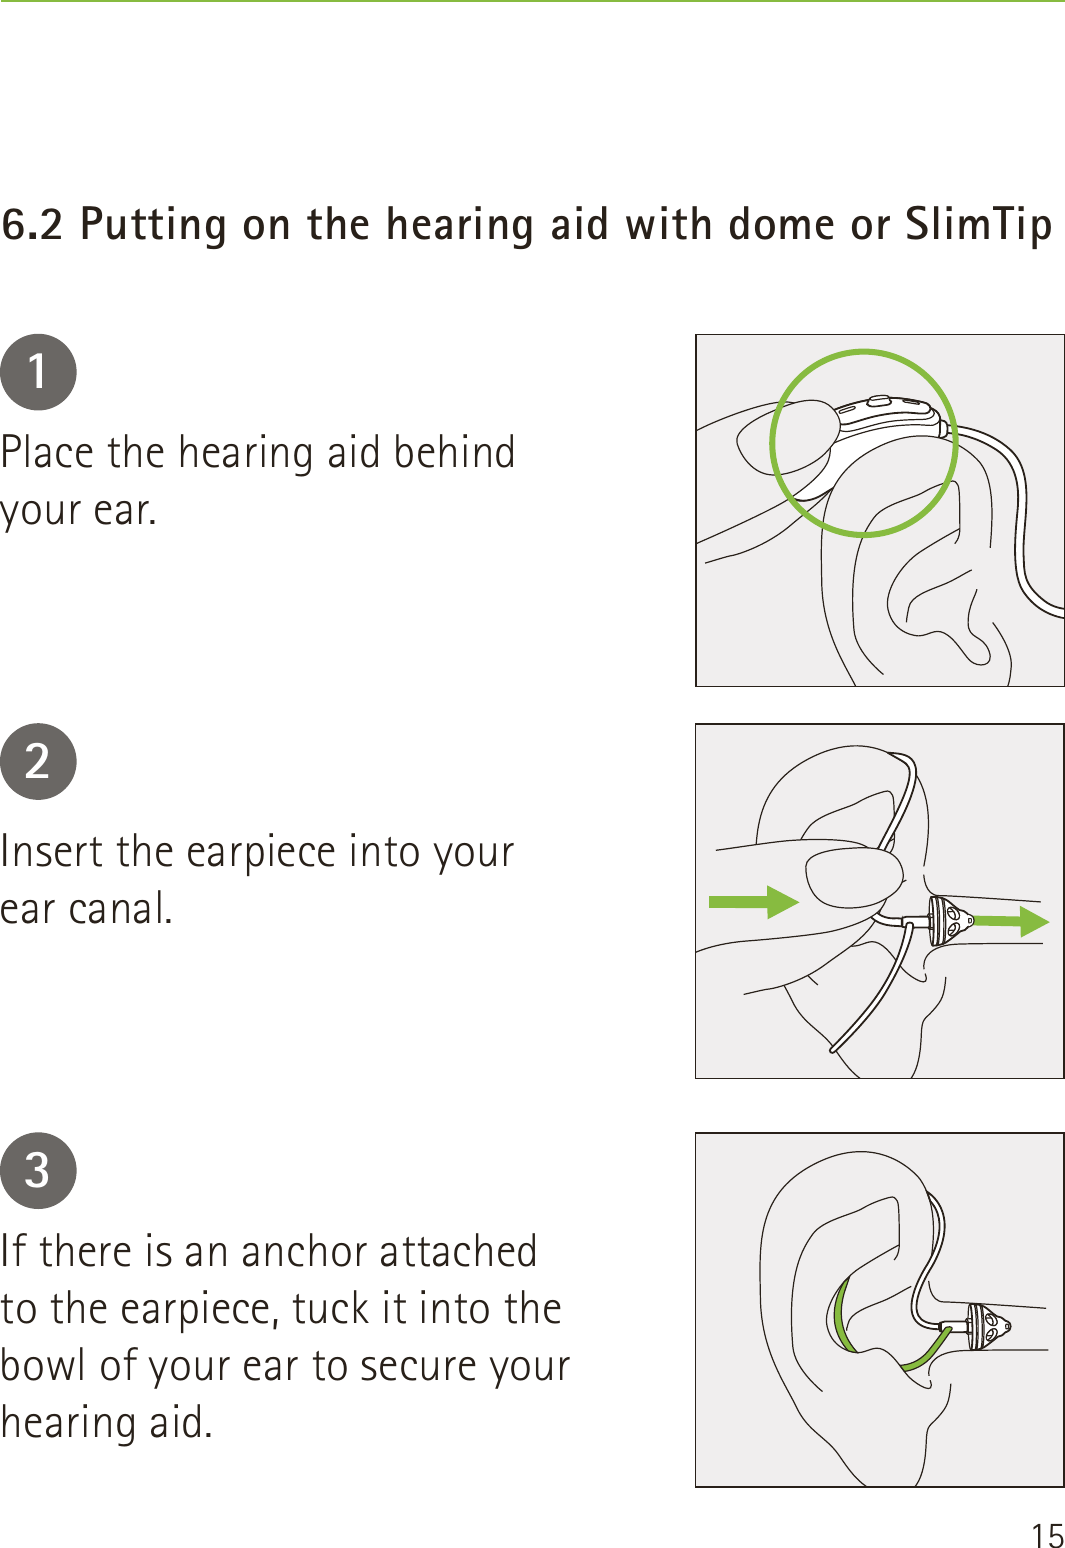 156.2 Putting on the hearing aid with dome or SlimTip123Place the hearing aid behind  your ear.Insert the earpiece into your  ear canal.If there is an anchor attached  to the earpiece, tuck it into the bowl of your ear to secure your hearing aid.